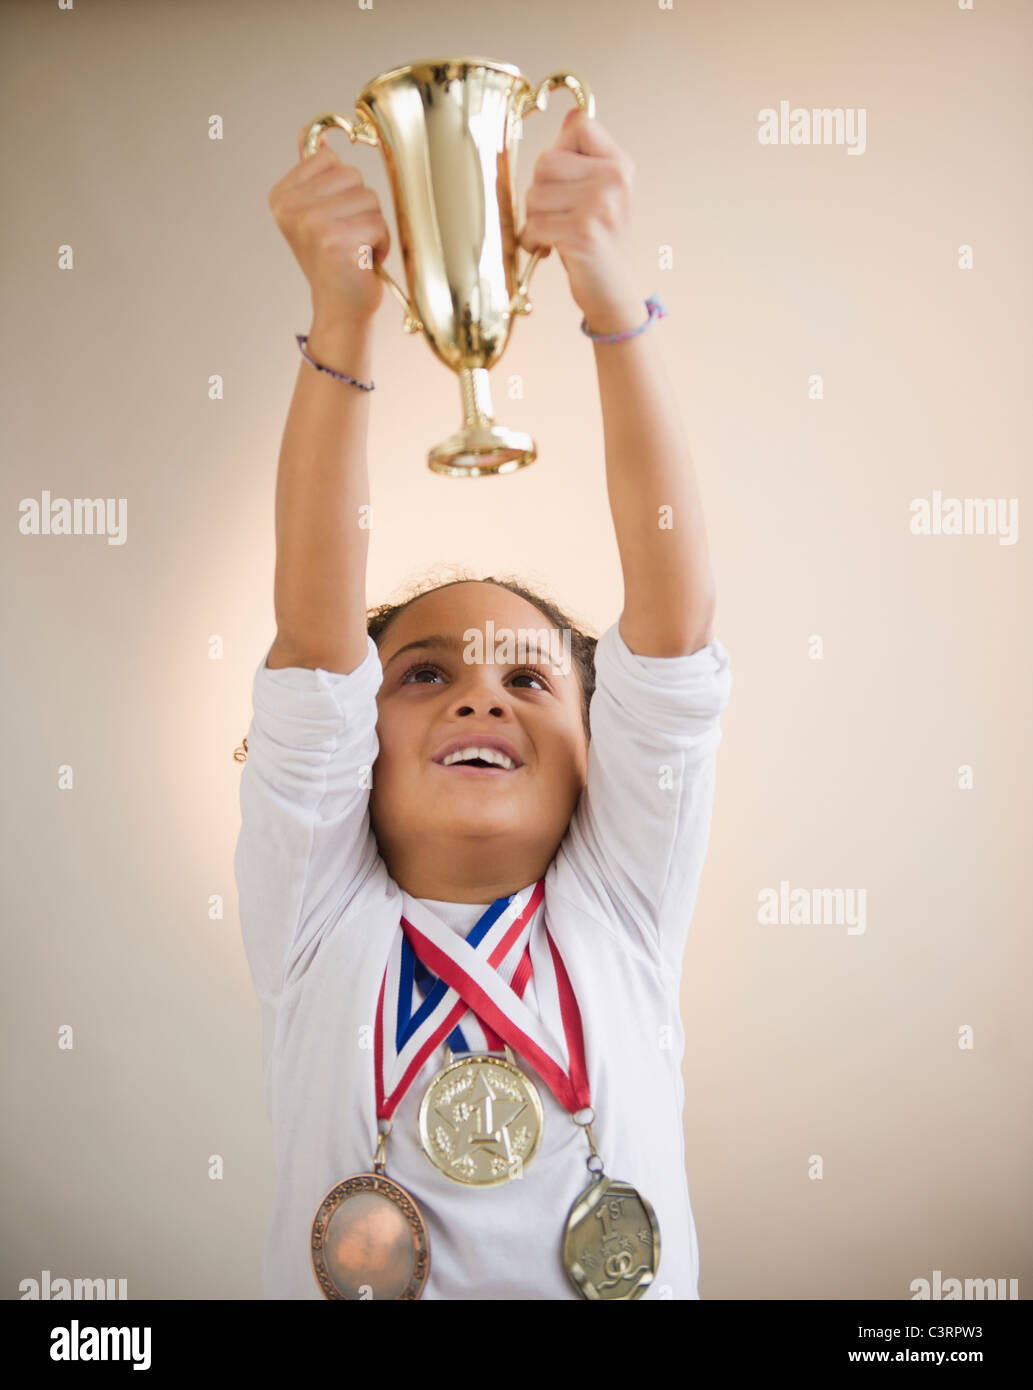 African American girl holding up trophy Stock Photo